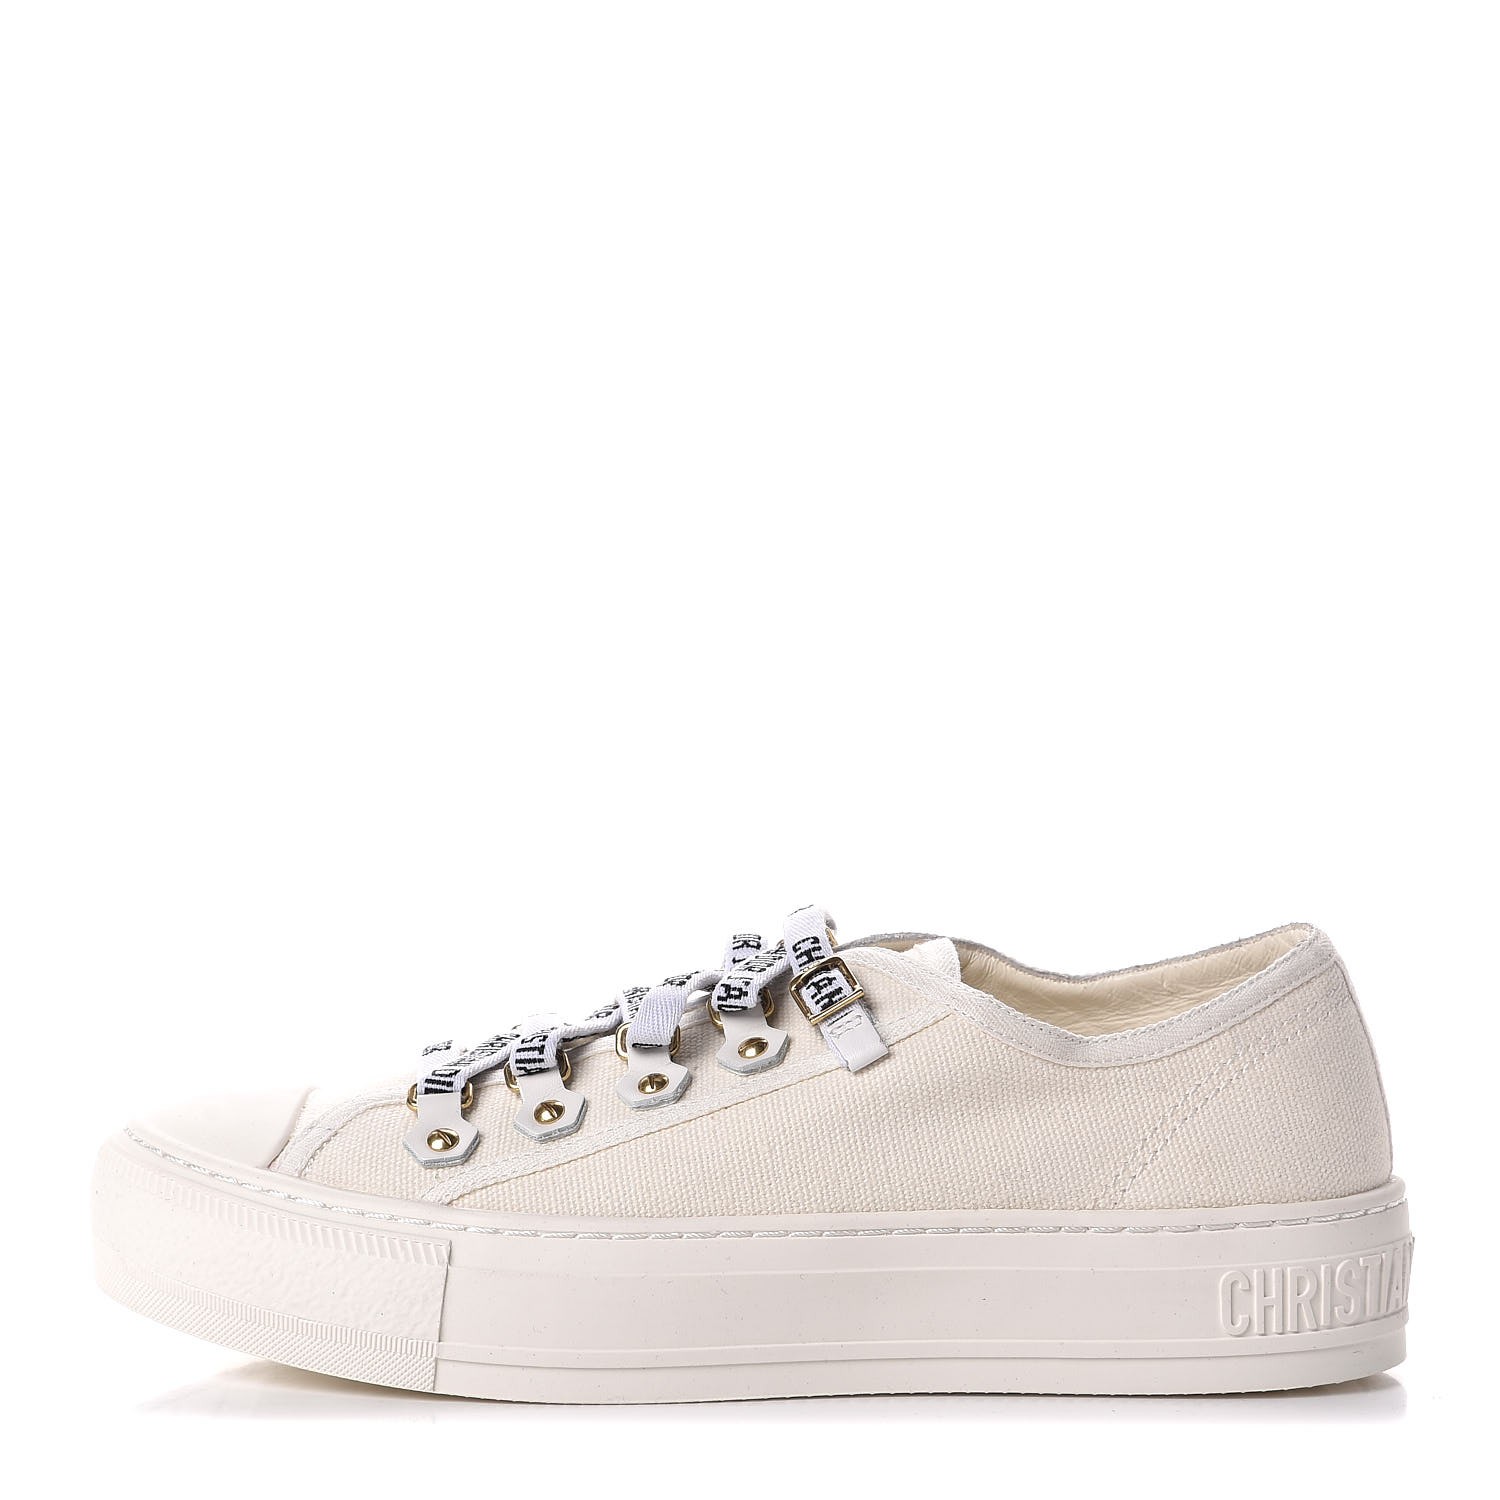 CHRISTIAN DIOR Canvas Walk'n Dior Low Top Sneakers 36 White 319683